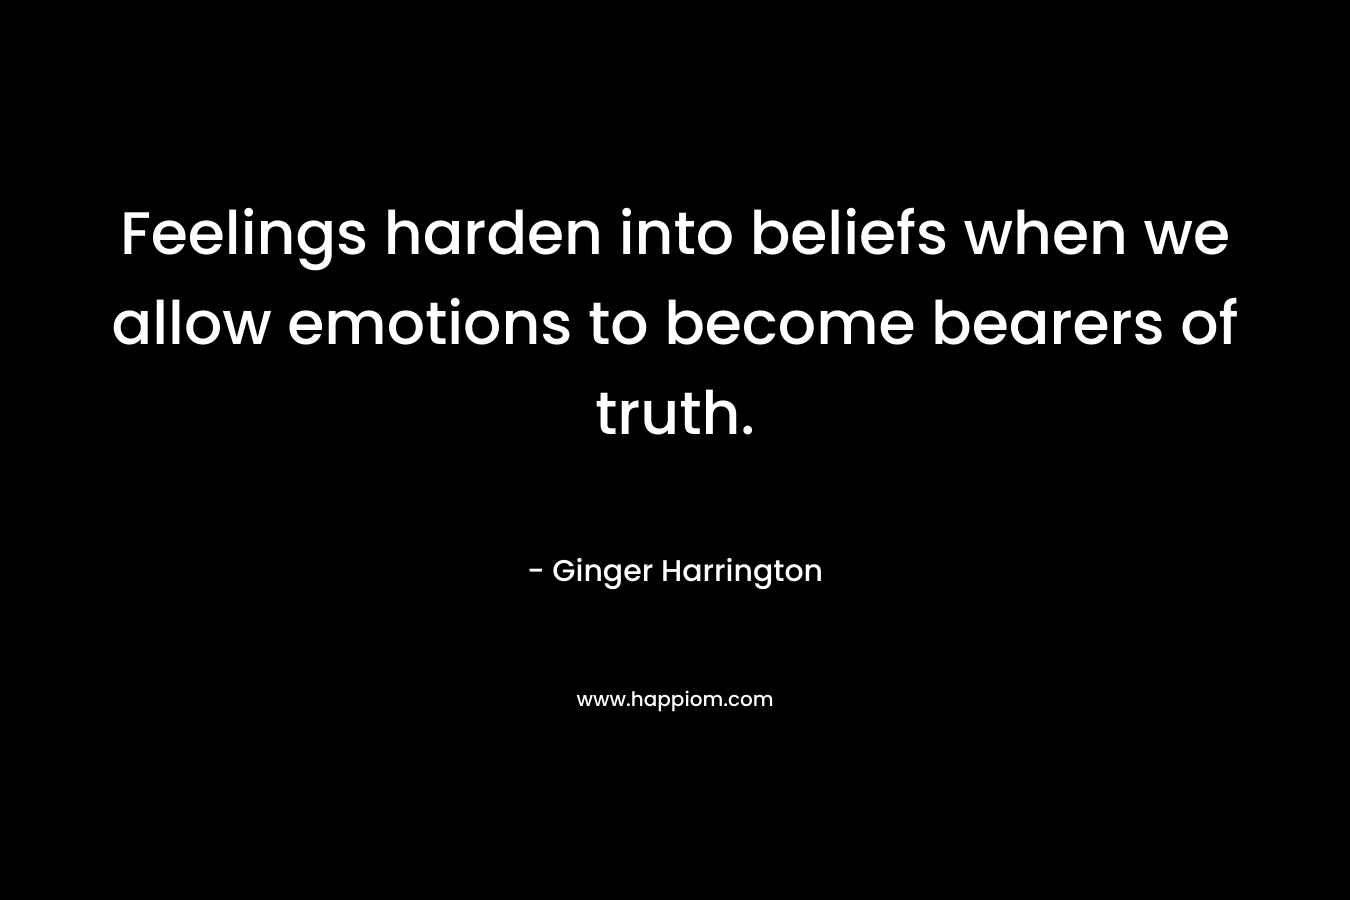 Feelings harden into beliefs when we allow emotions to become bearers of truth. – Ginger Harrington